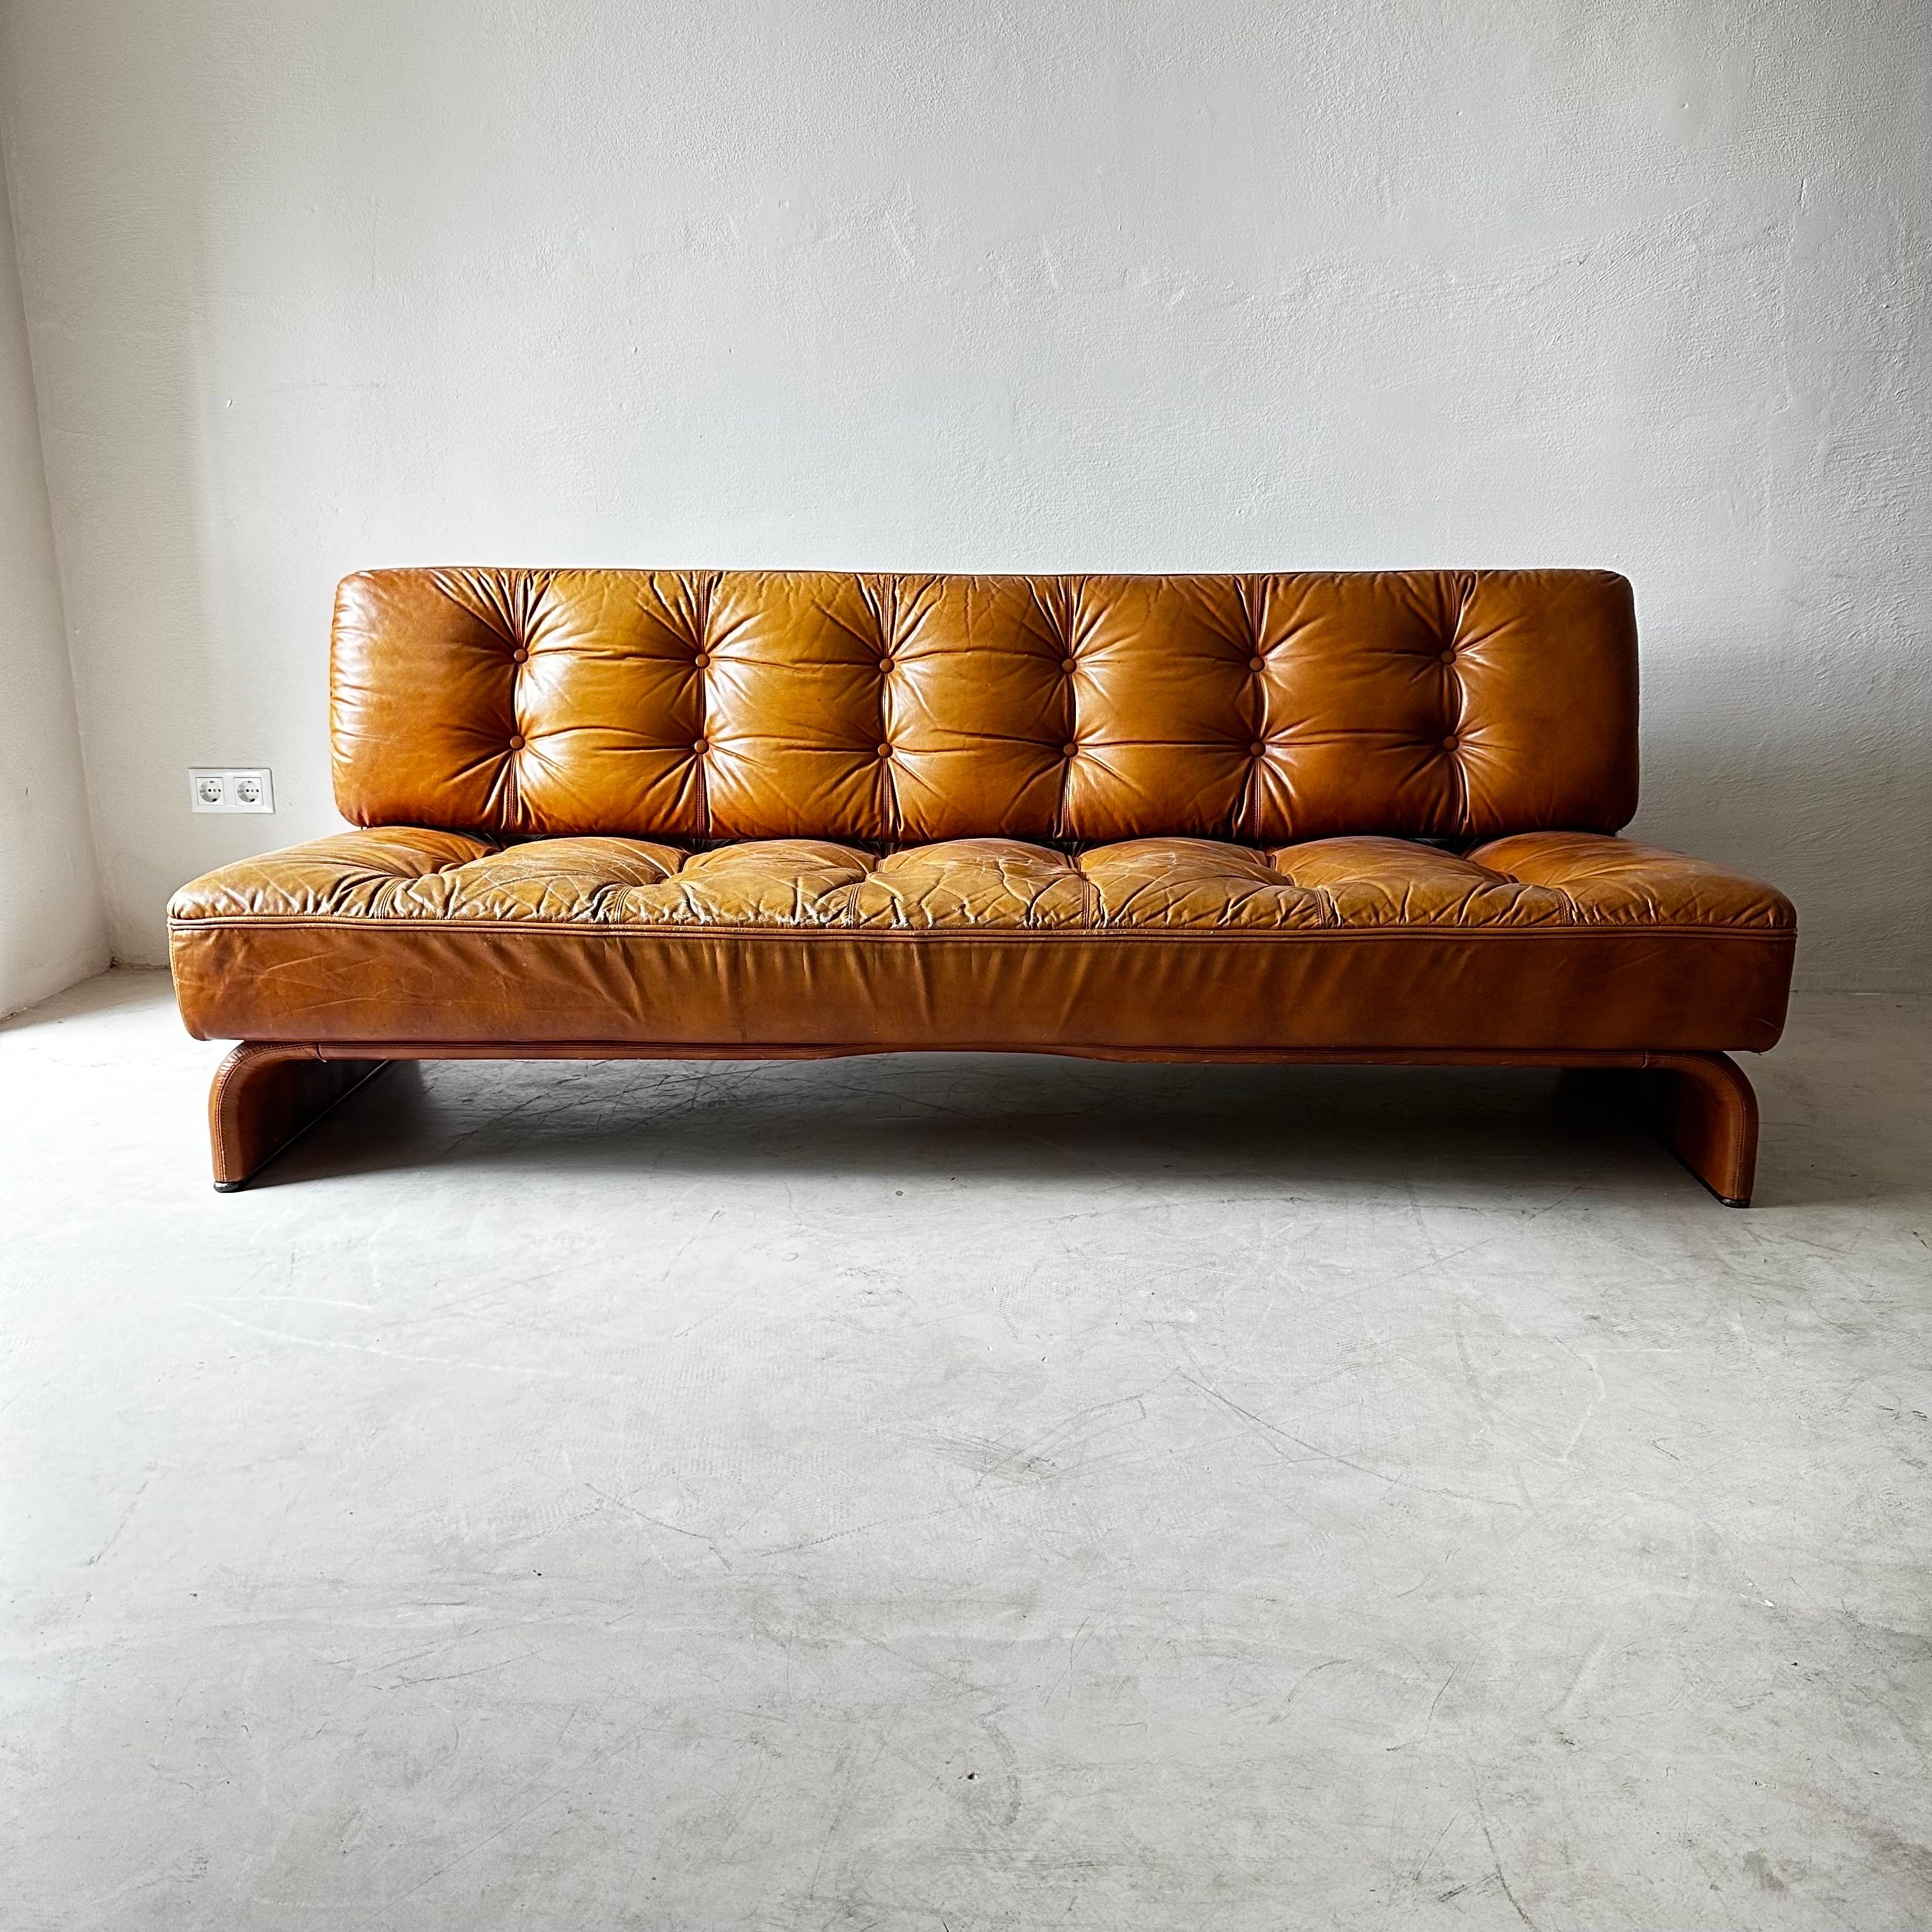 Late 20th Century Johannes Spalt for Wittmann 'Constanze' Sofa in Cognac Leather For Sale